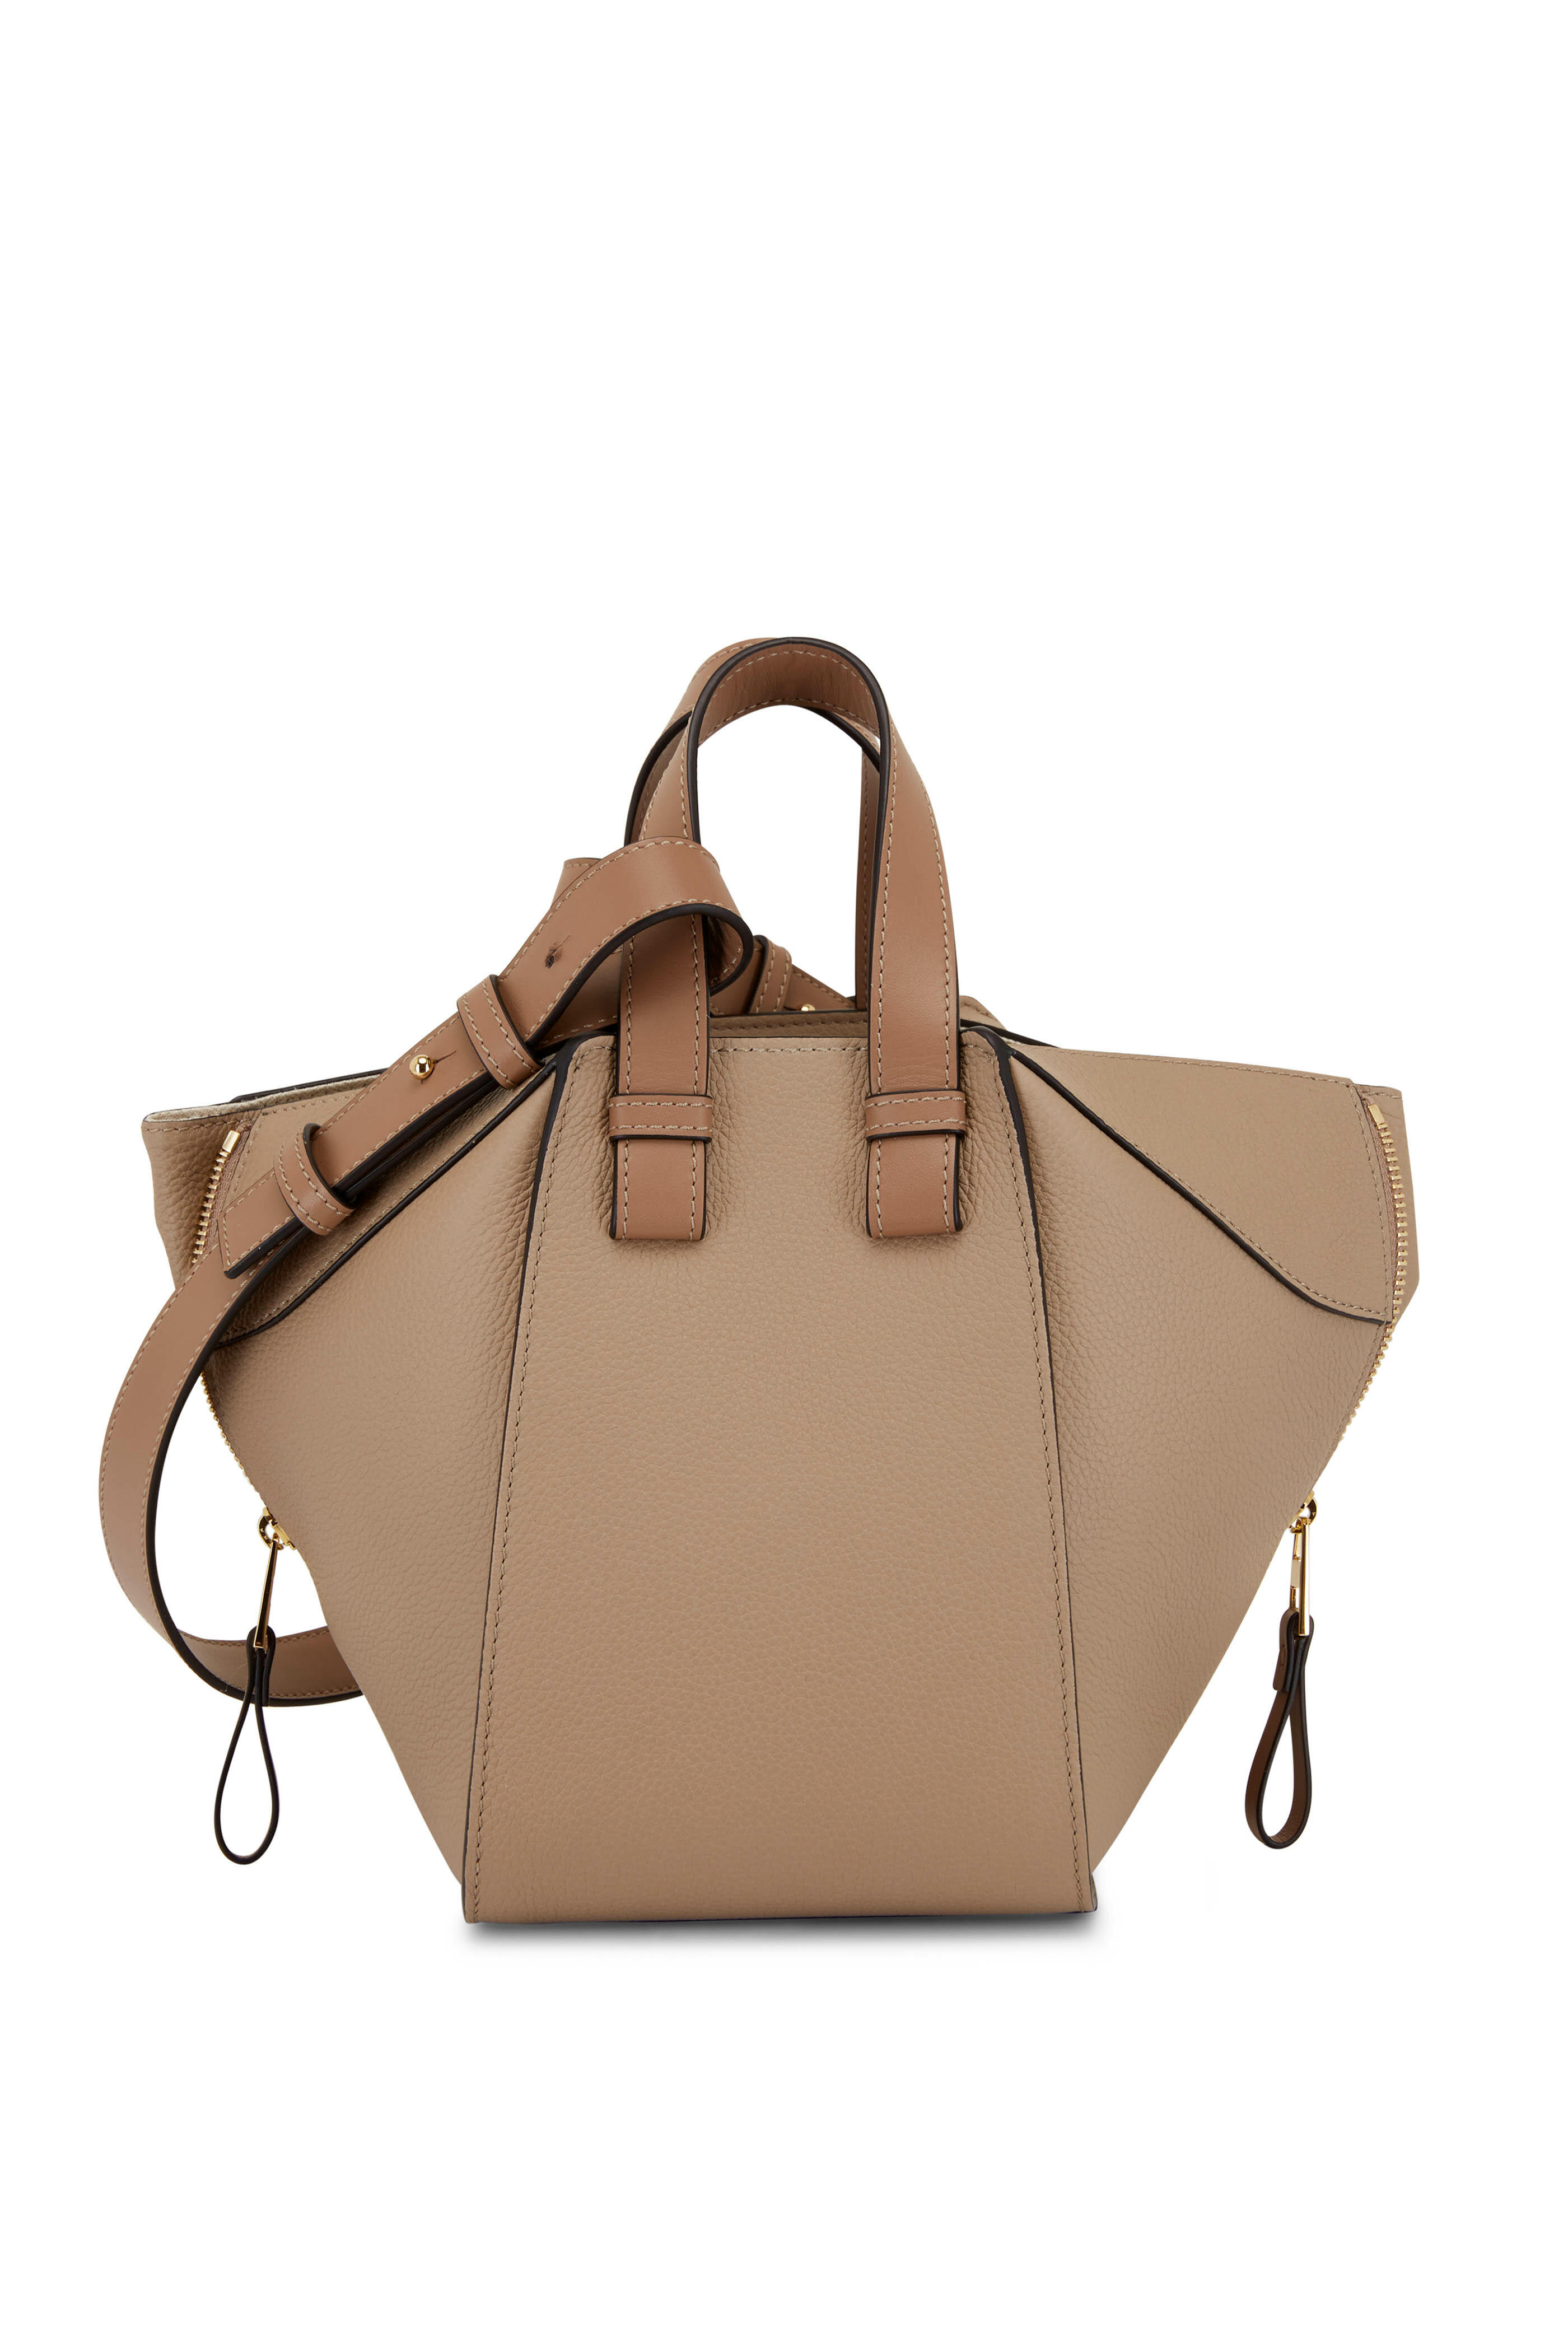 Loewe - Compact Hammock Sand Leather Bag | Mitchell Stores